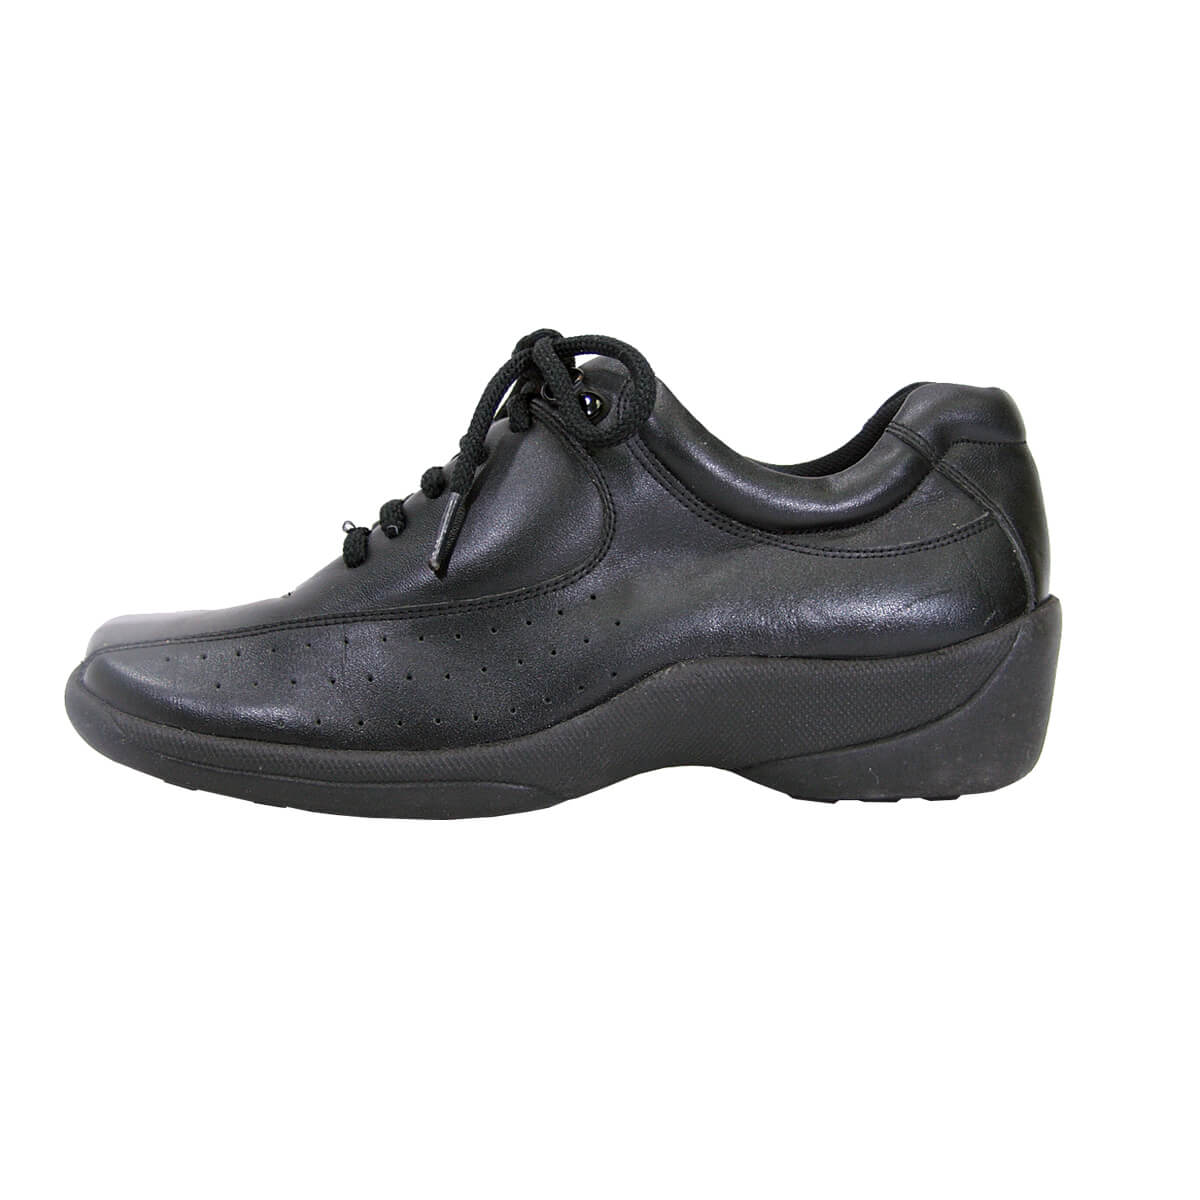 24 HOUR COMFORT Gina Women's Wide Width Leather Lace-Up Shoes